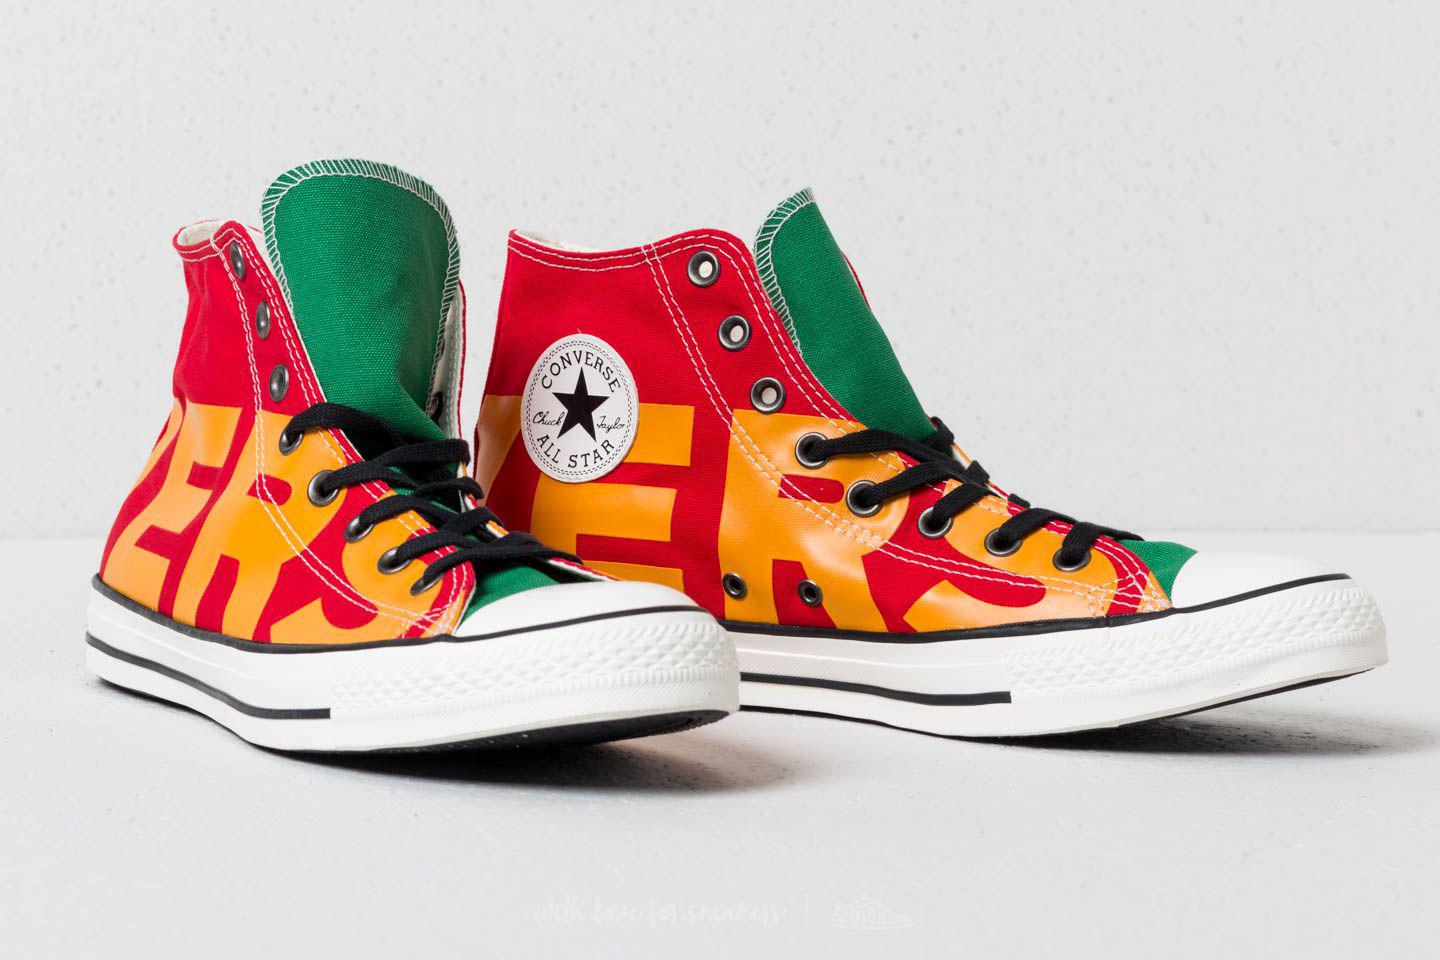 red and yellow converse